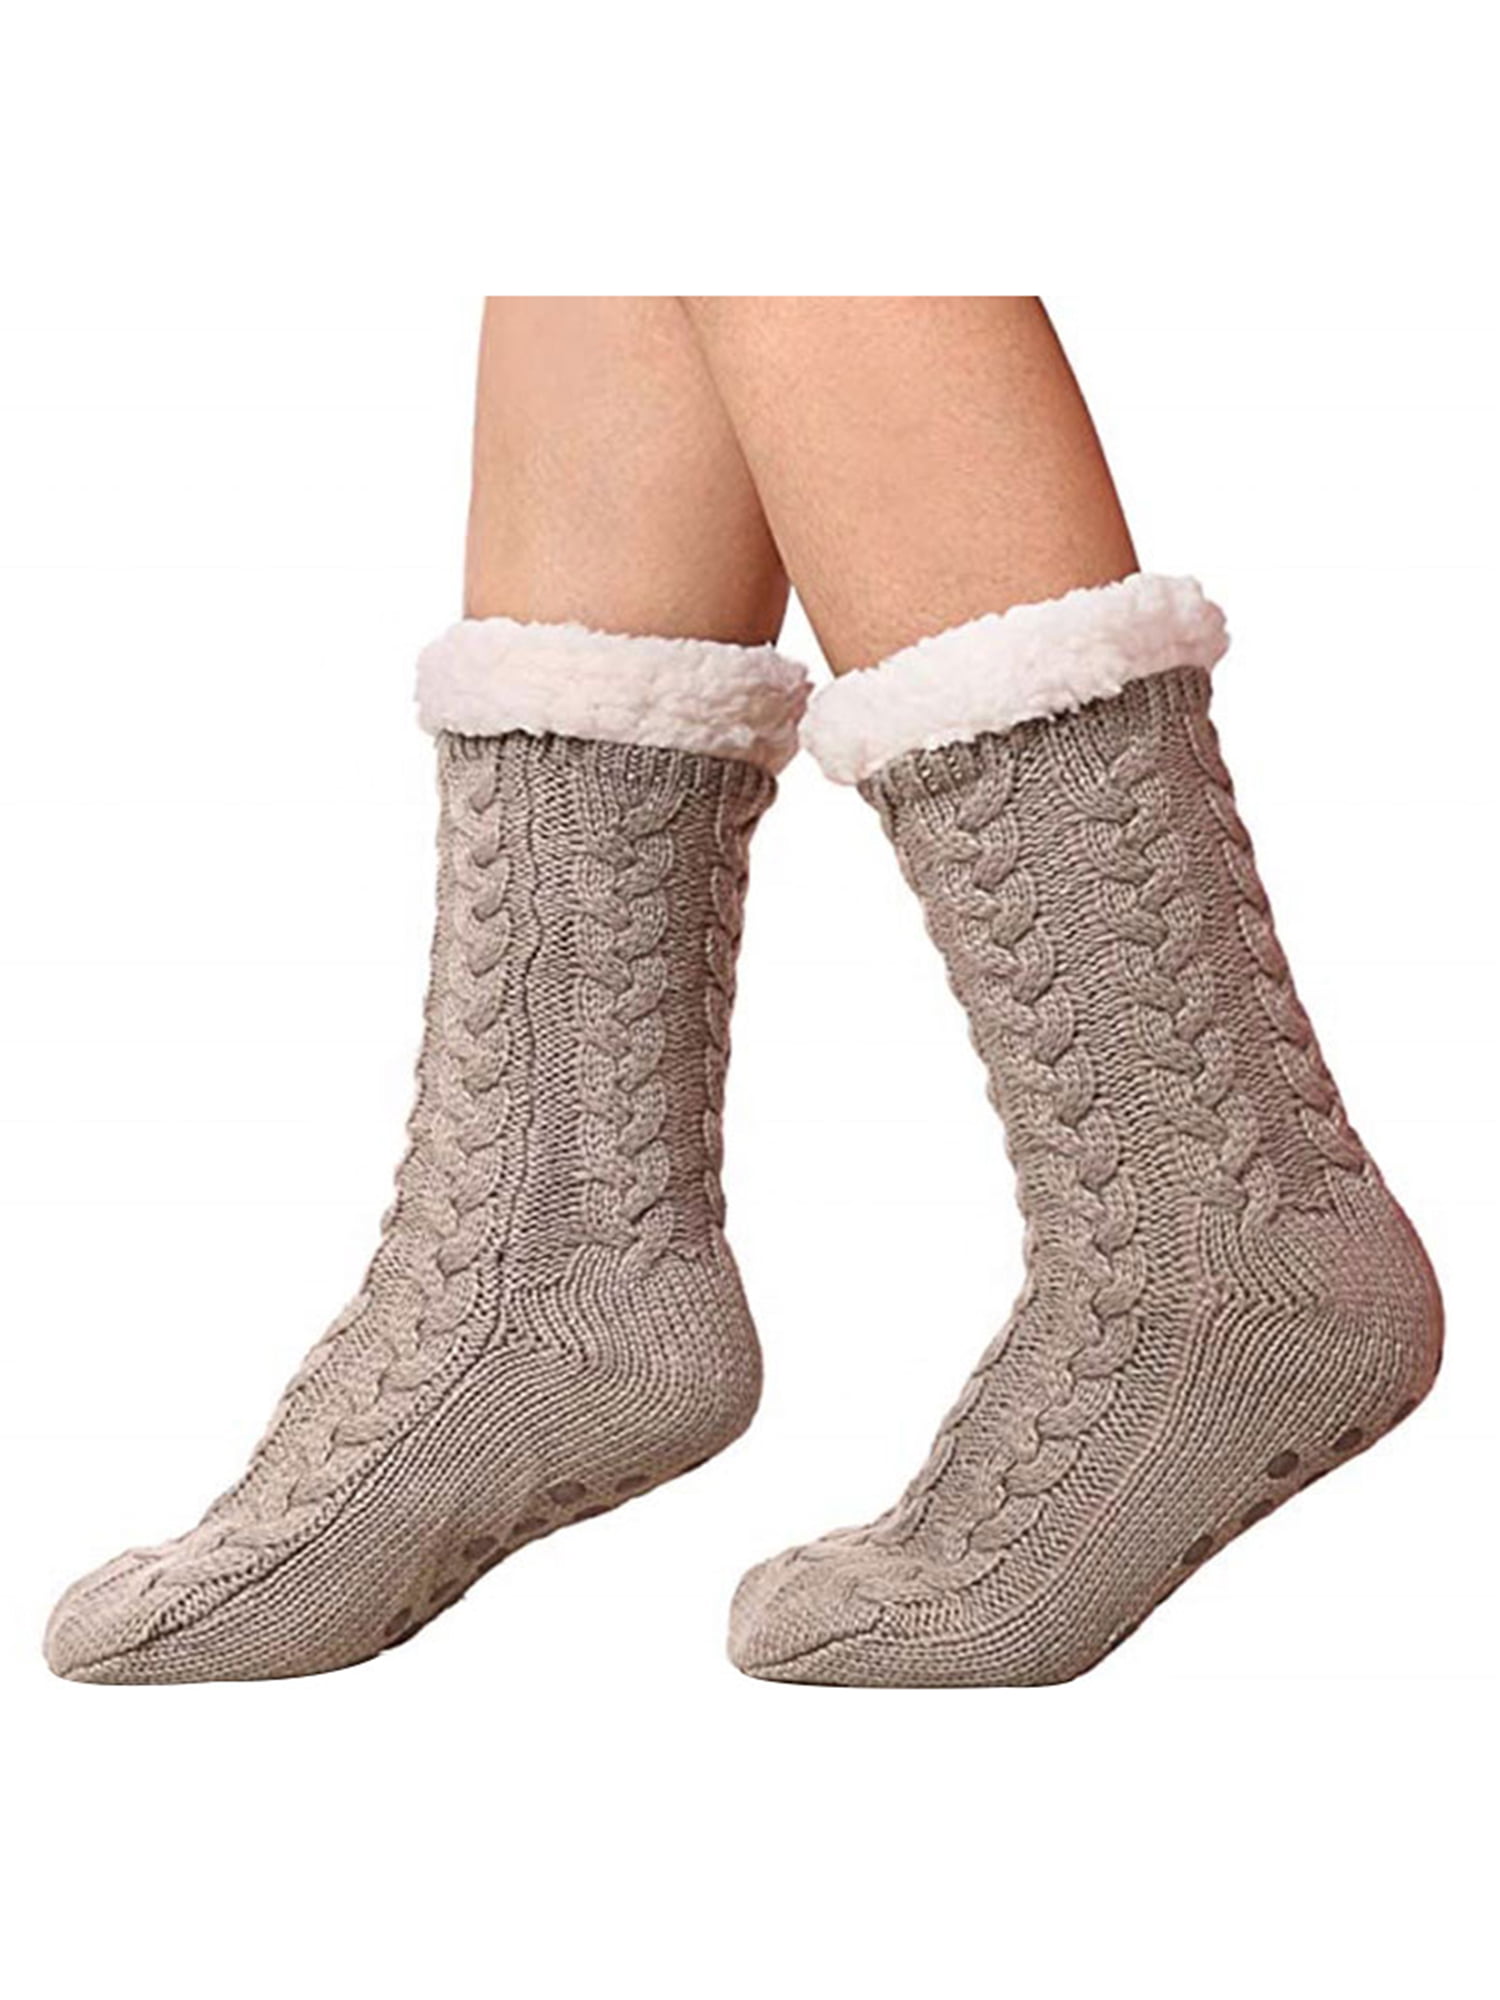 SDBING Womens Winter Super Soft Warm Cozy Fuzzy Fleece-lined Christmas Gift With Grippers Slipper Socks 